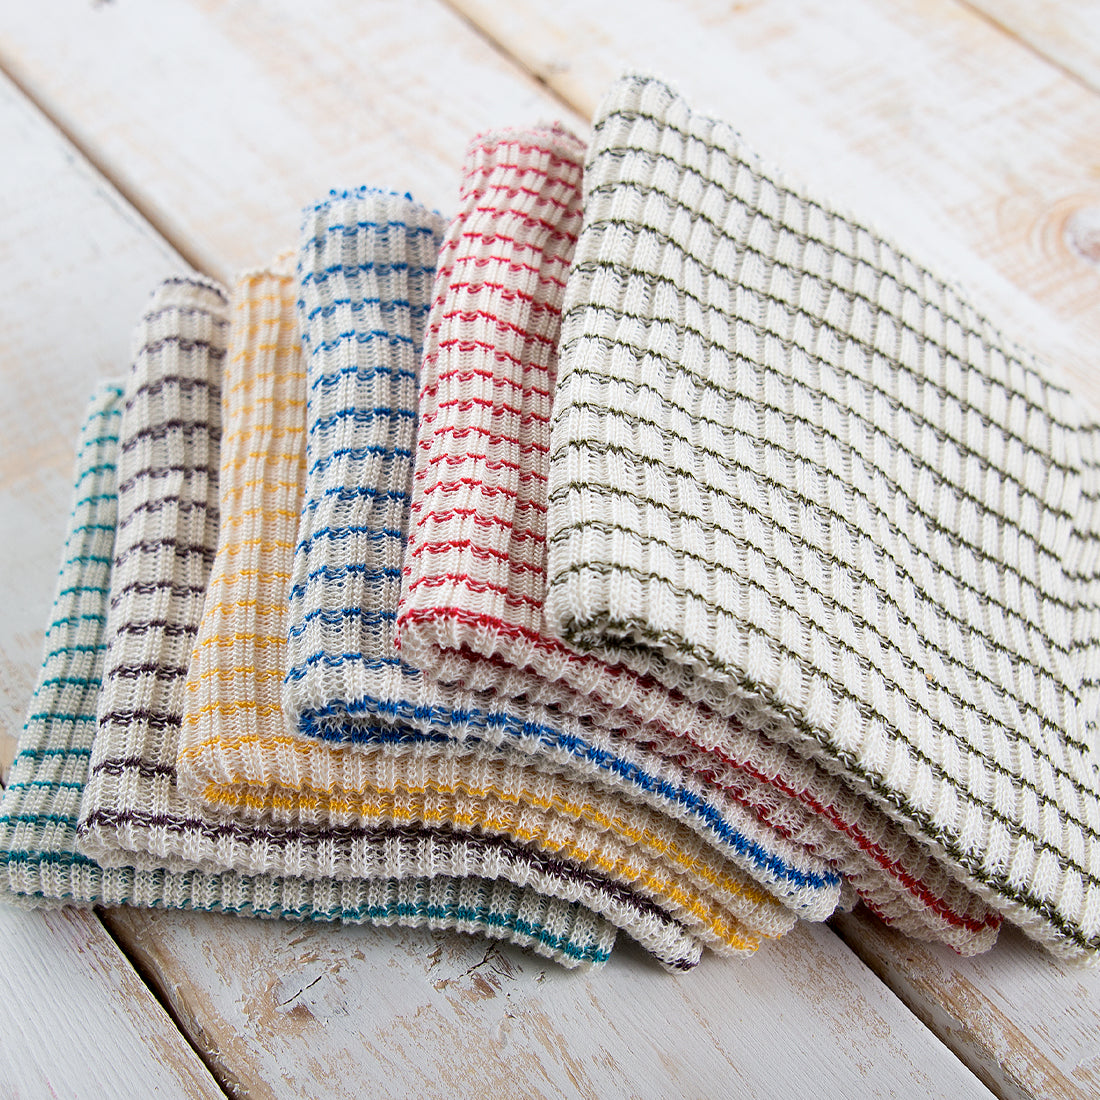 Pile of six woven multi-colored dishcloths. 